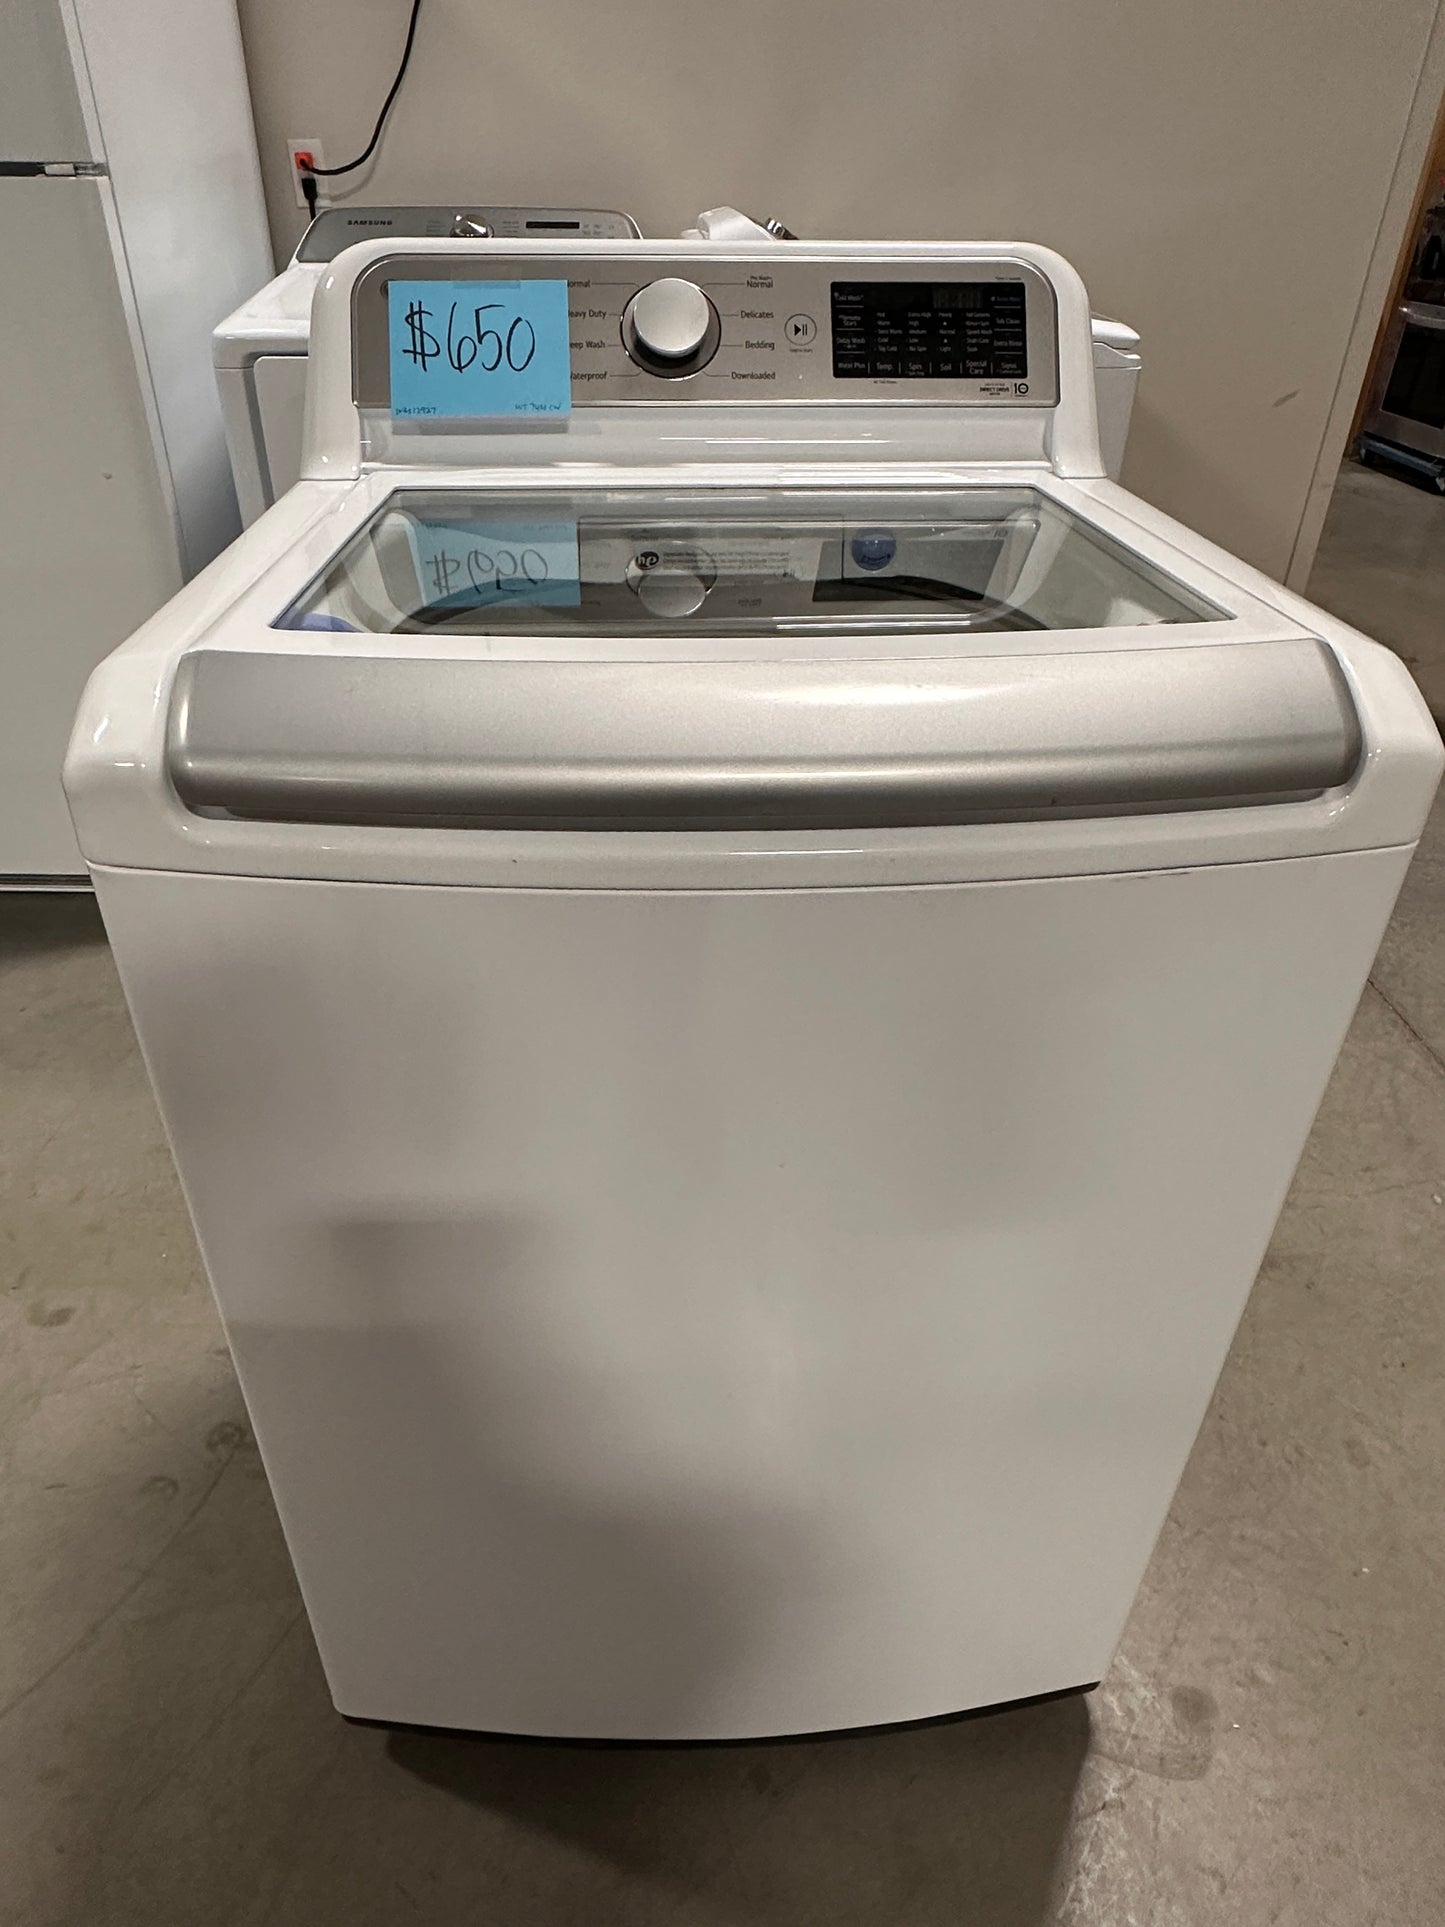 SMART LG TOP LOAD WASHER - WAS12927 WT7400CW